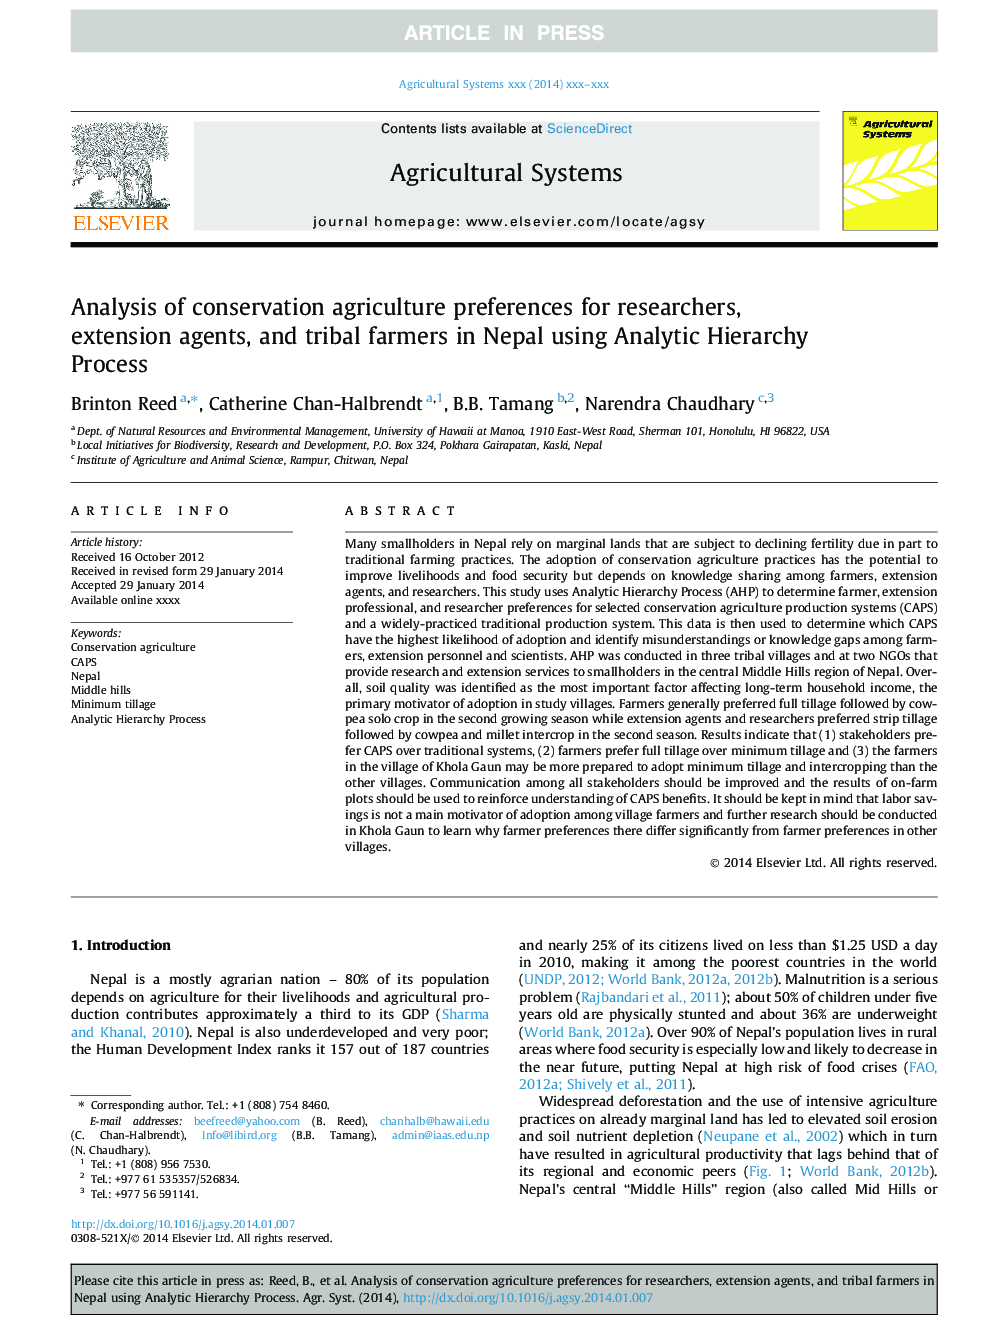 Analysis of conservation agriculture preferences for researchers, extension agents, and tribal farmers in Nepal using Analytic Hierarchy Process